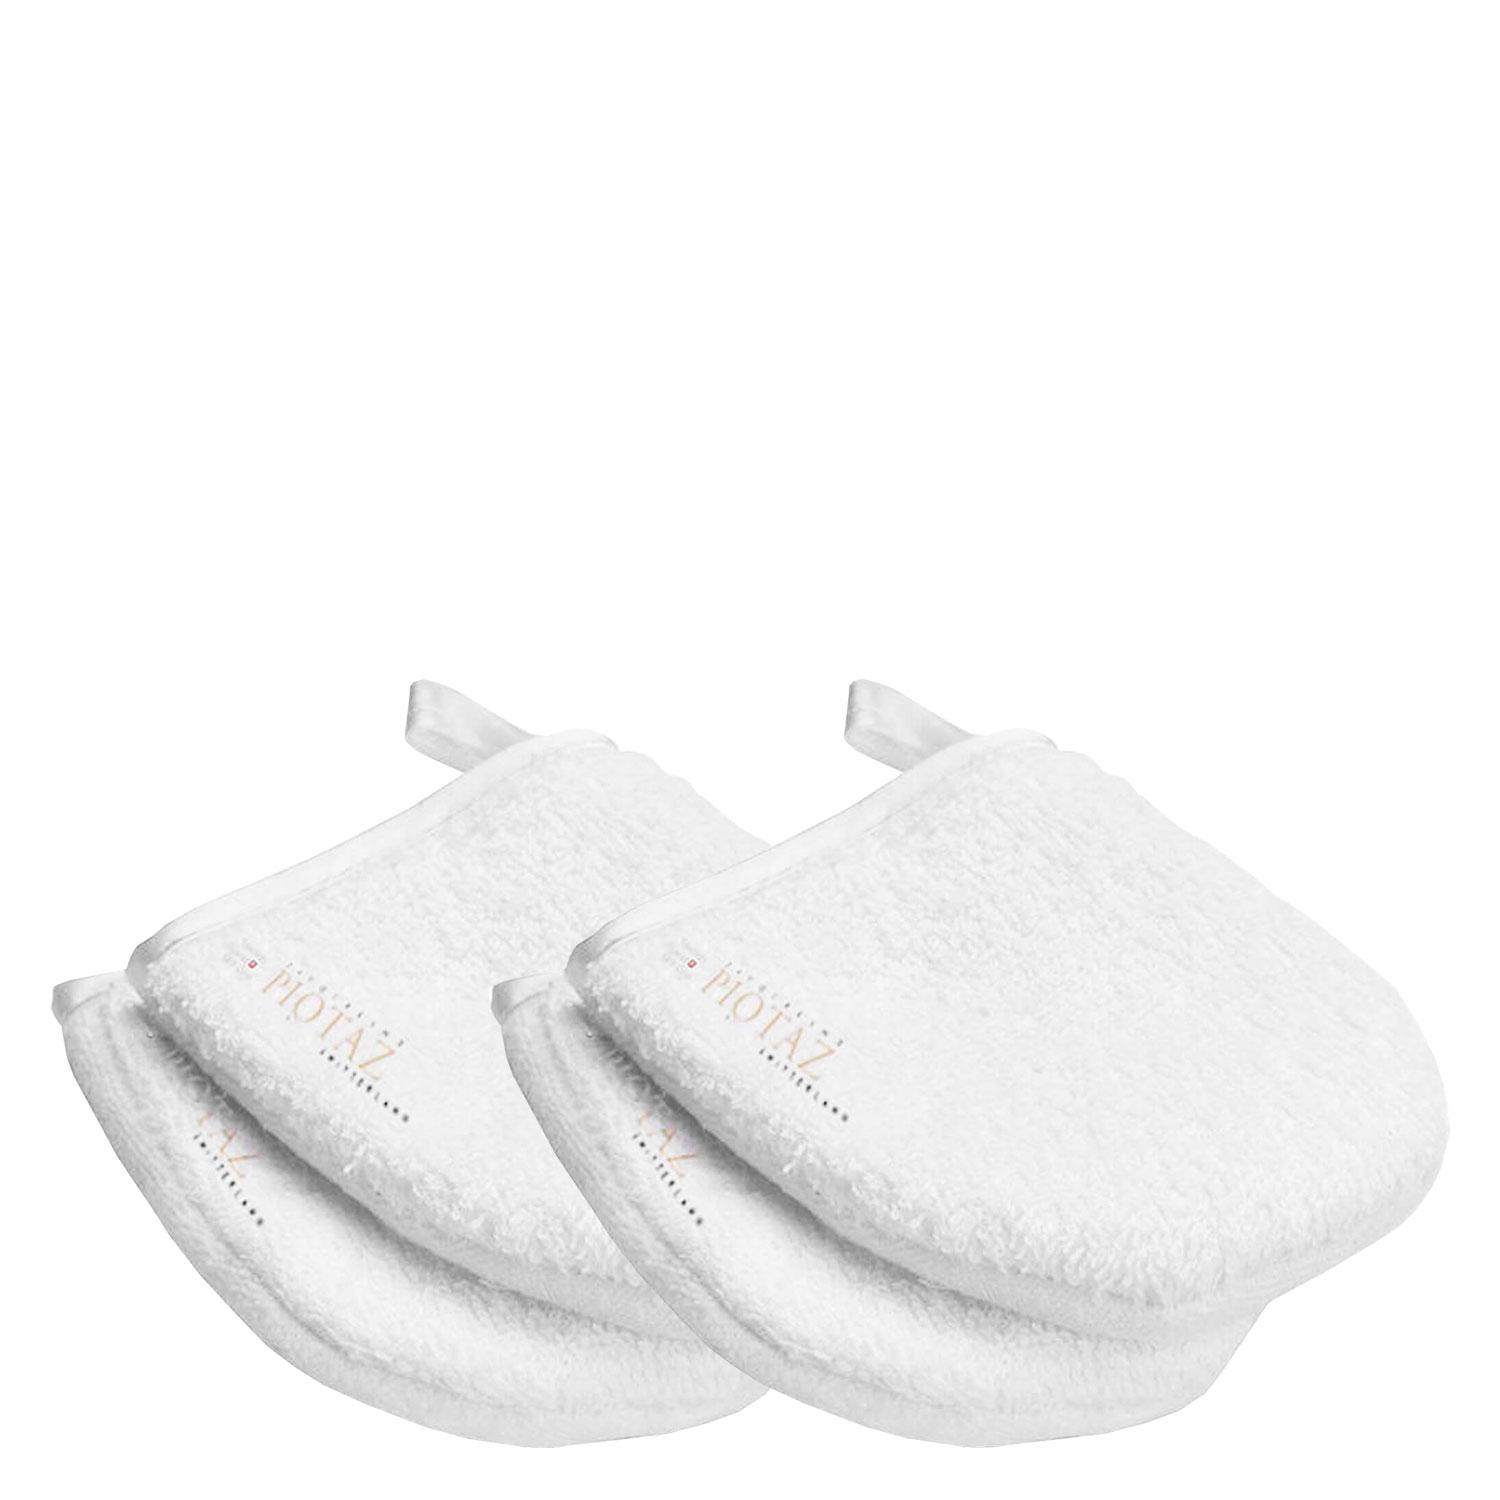 Cellpower Experts - Cotton Cleansing Mitts